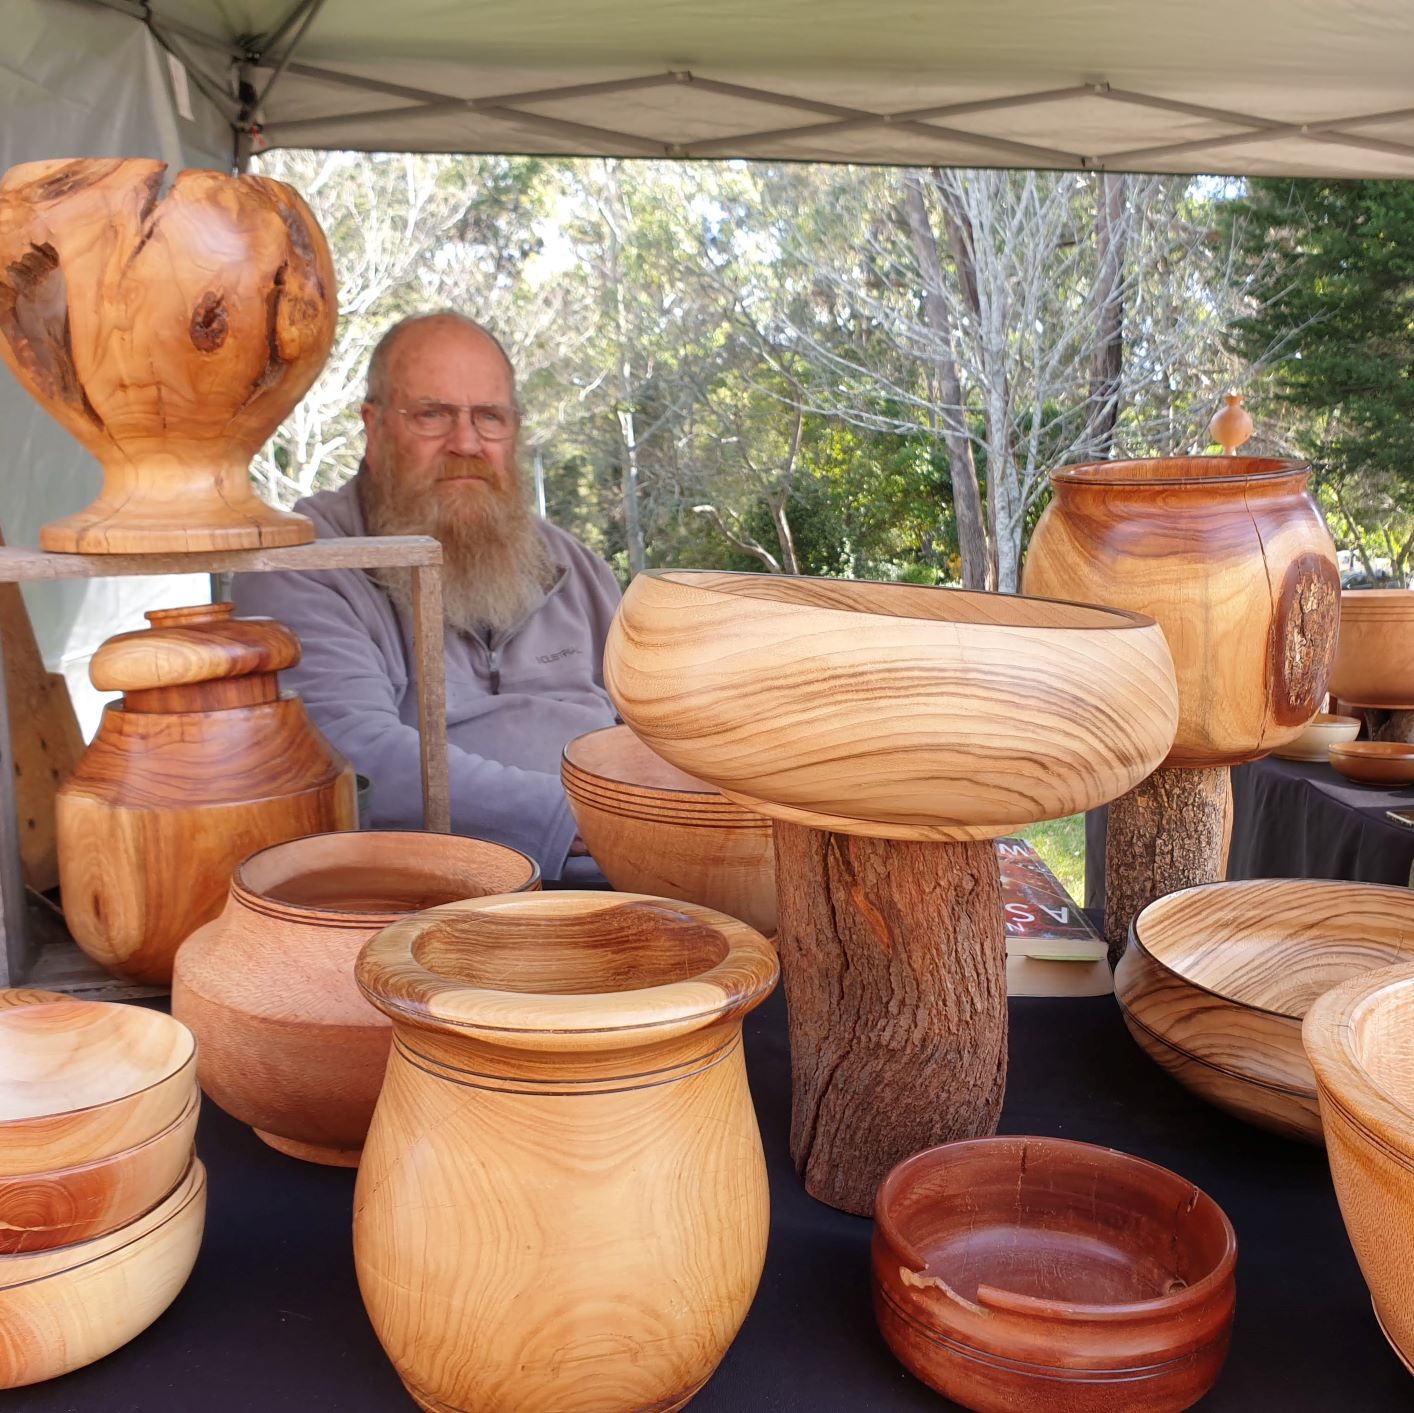 Photo of a stall with a man selling woodturned products